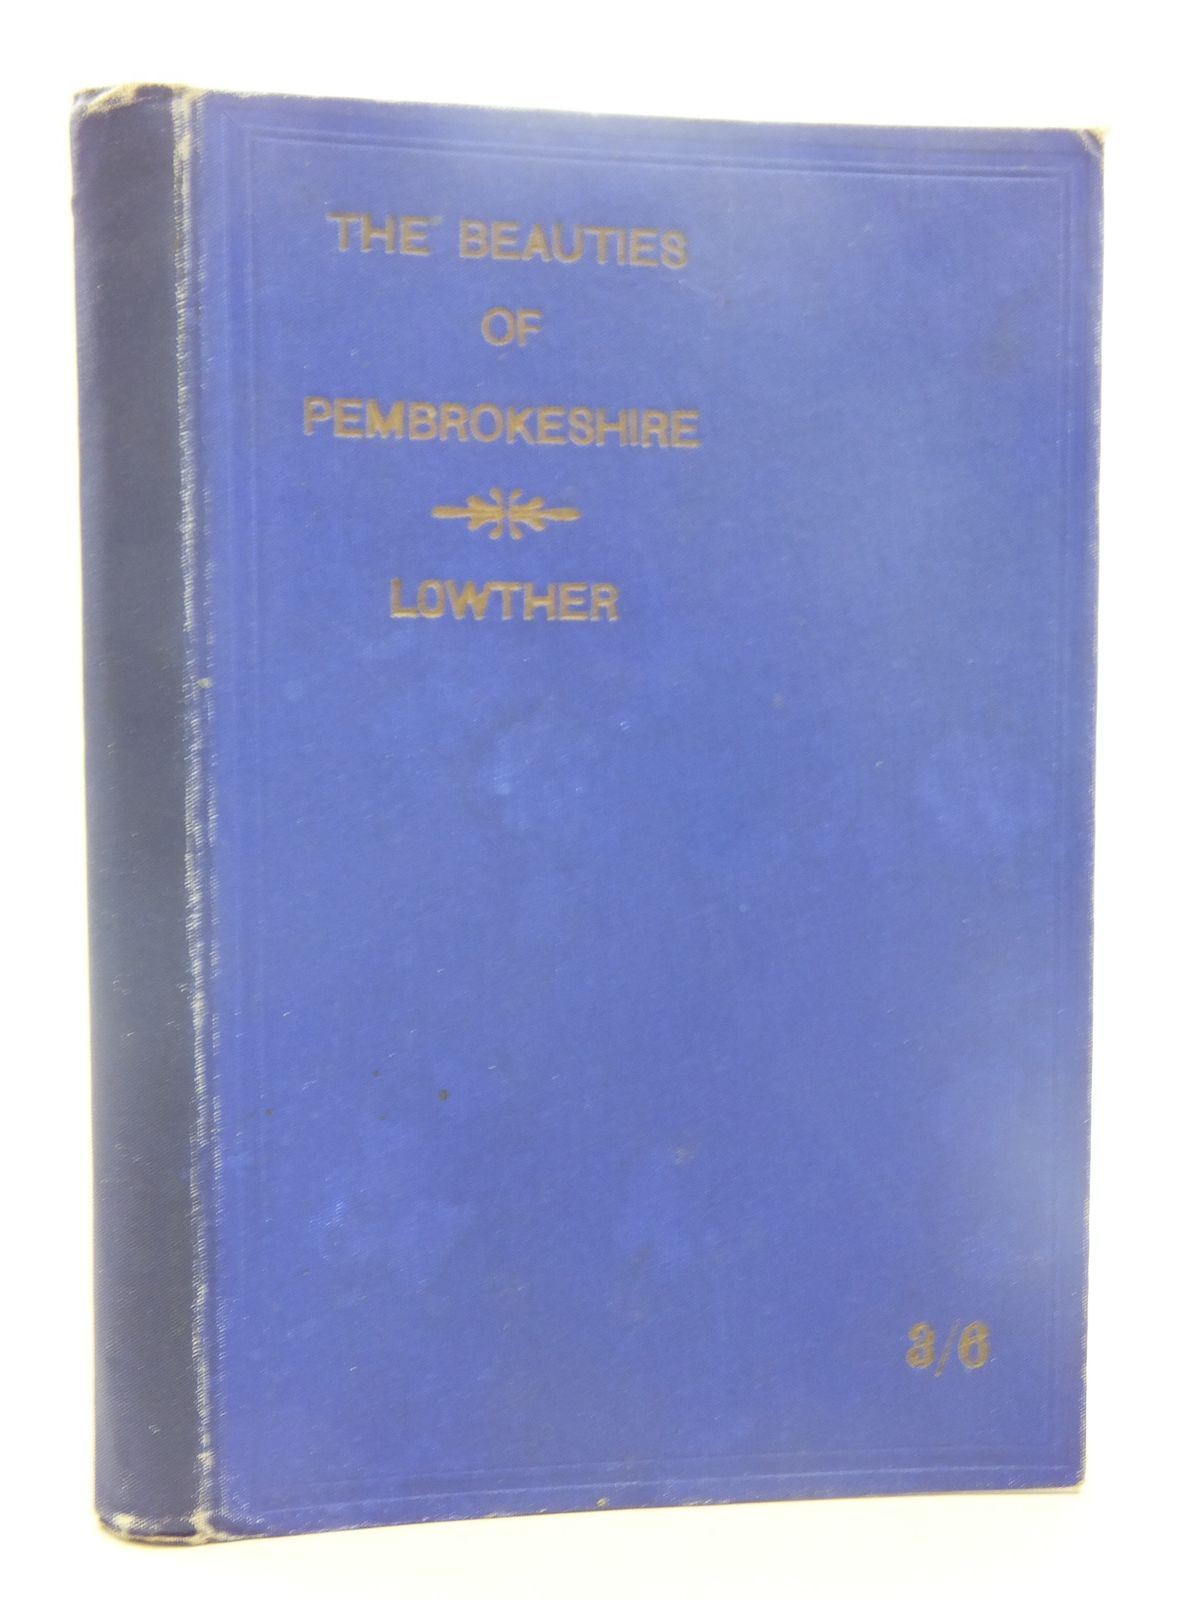 Photo of THE BEAUTIES OF PEMBROKESHIRE written by Lowther, F.L. published by The Welsh Outlook Press (STOCK CODE: 1607296)  for sale by Stella & Rose's Books